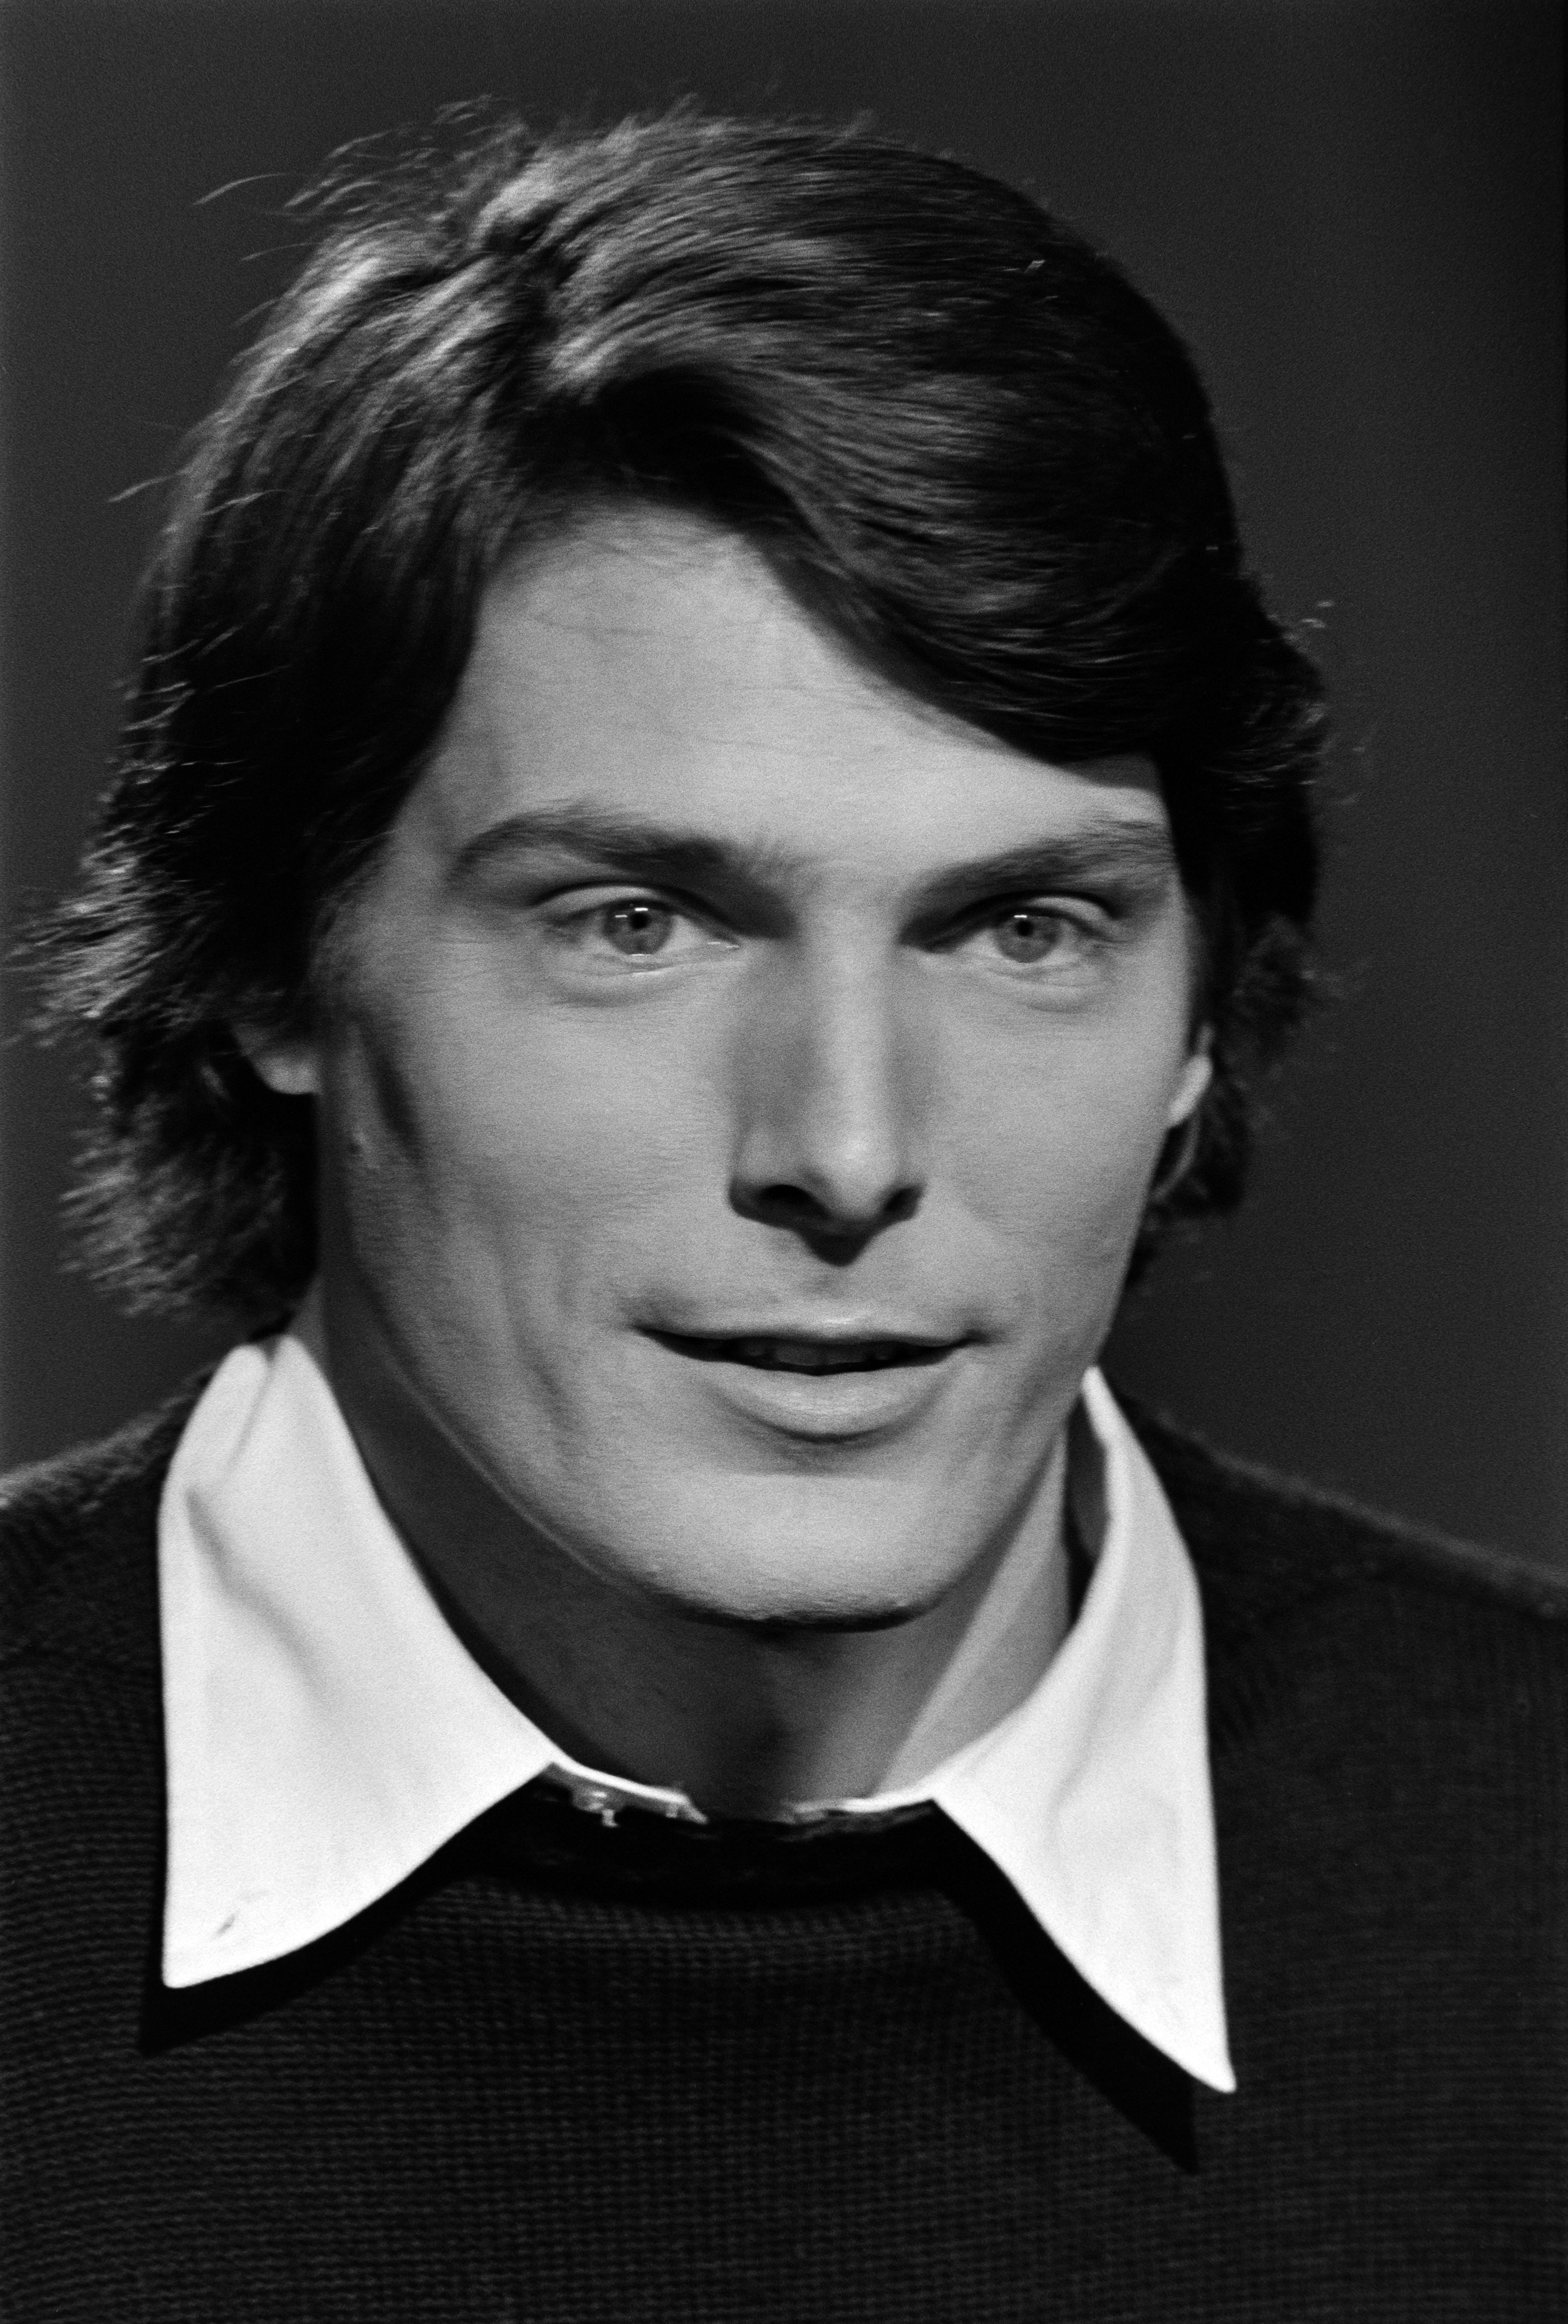 American actor Christopher Reeve, New York, New York, March 11, 1979. | Source: Getty Images